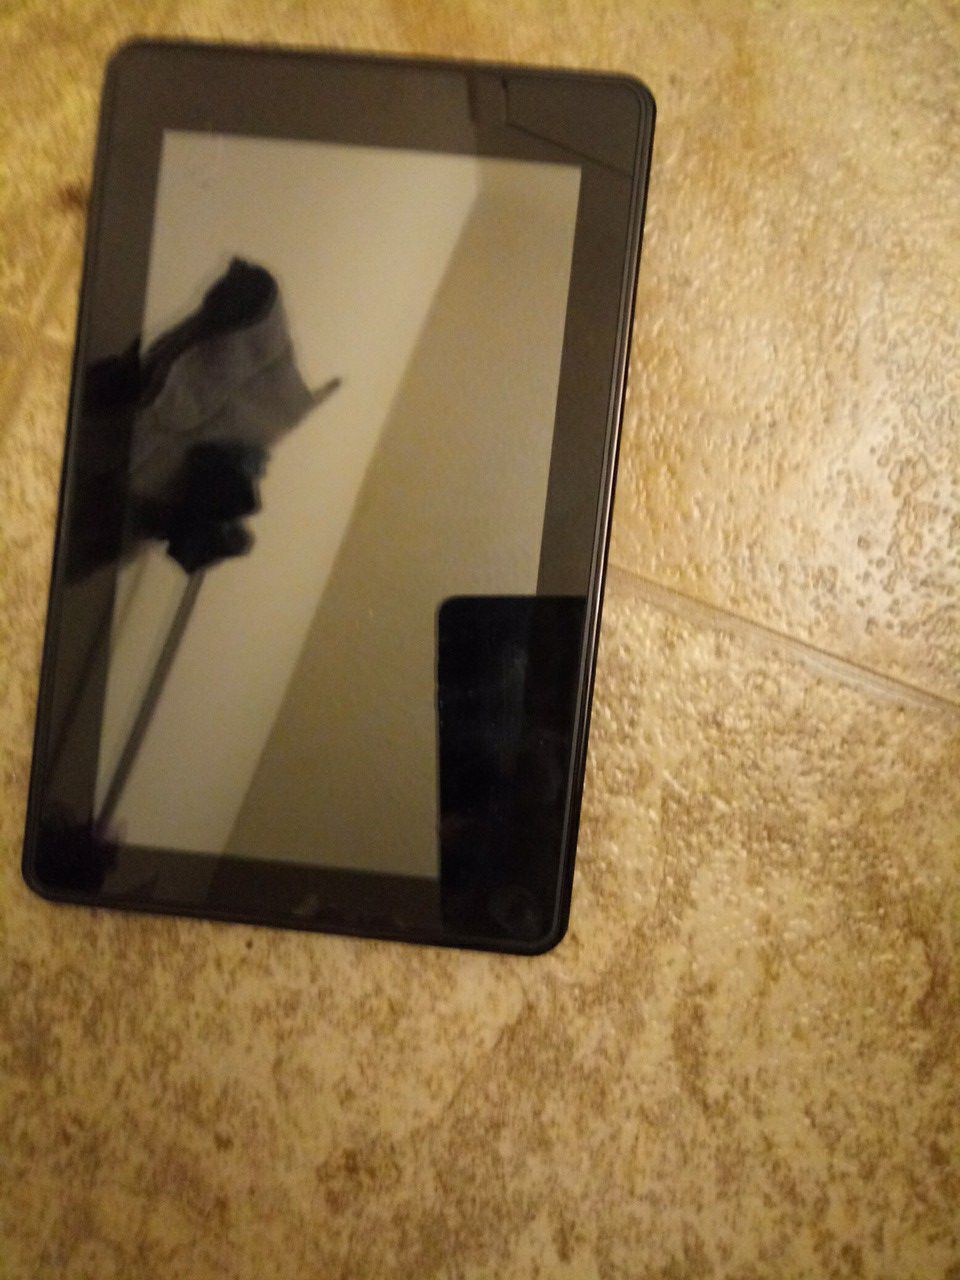 Kindle tablet brand new good condition